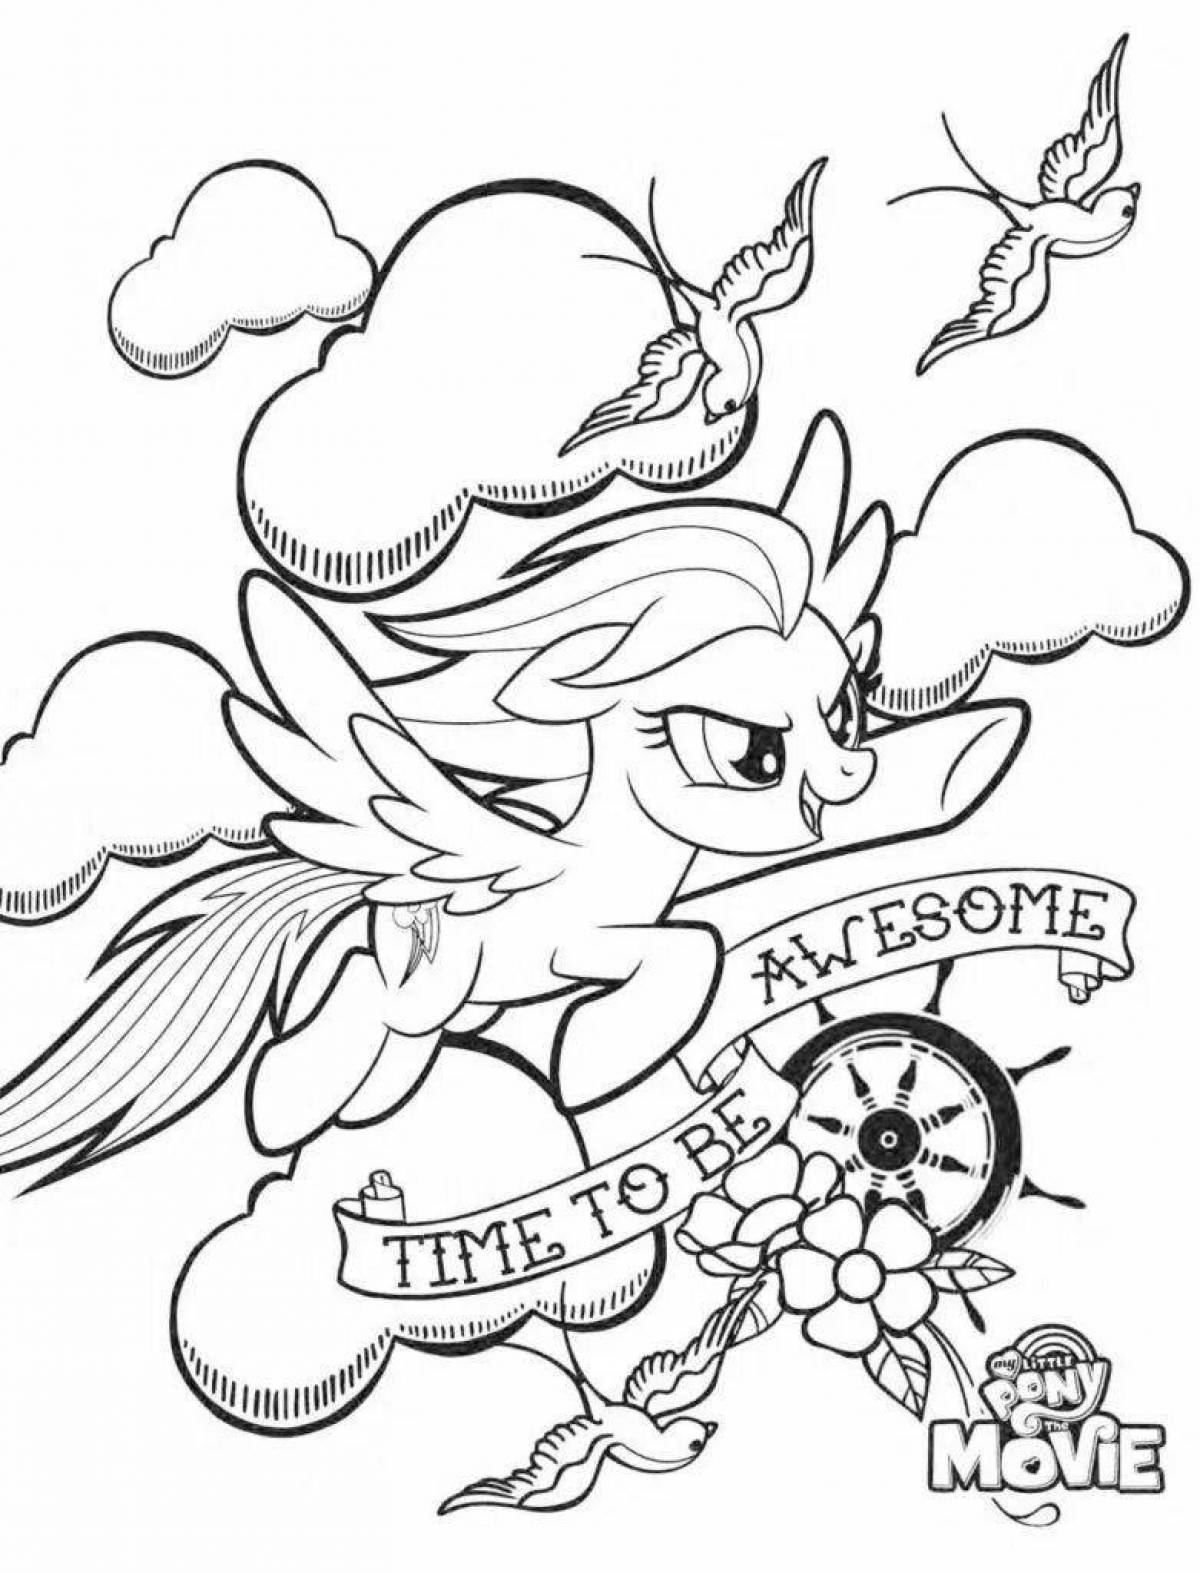 Colorful storm pony coloring page